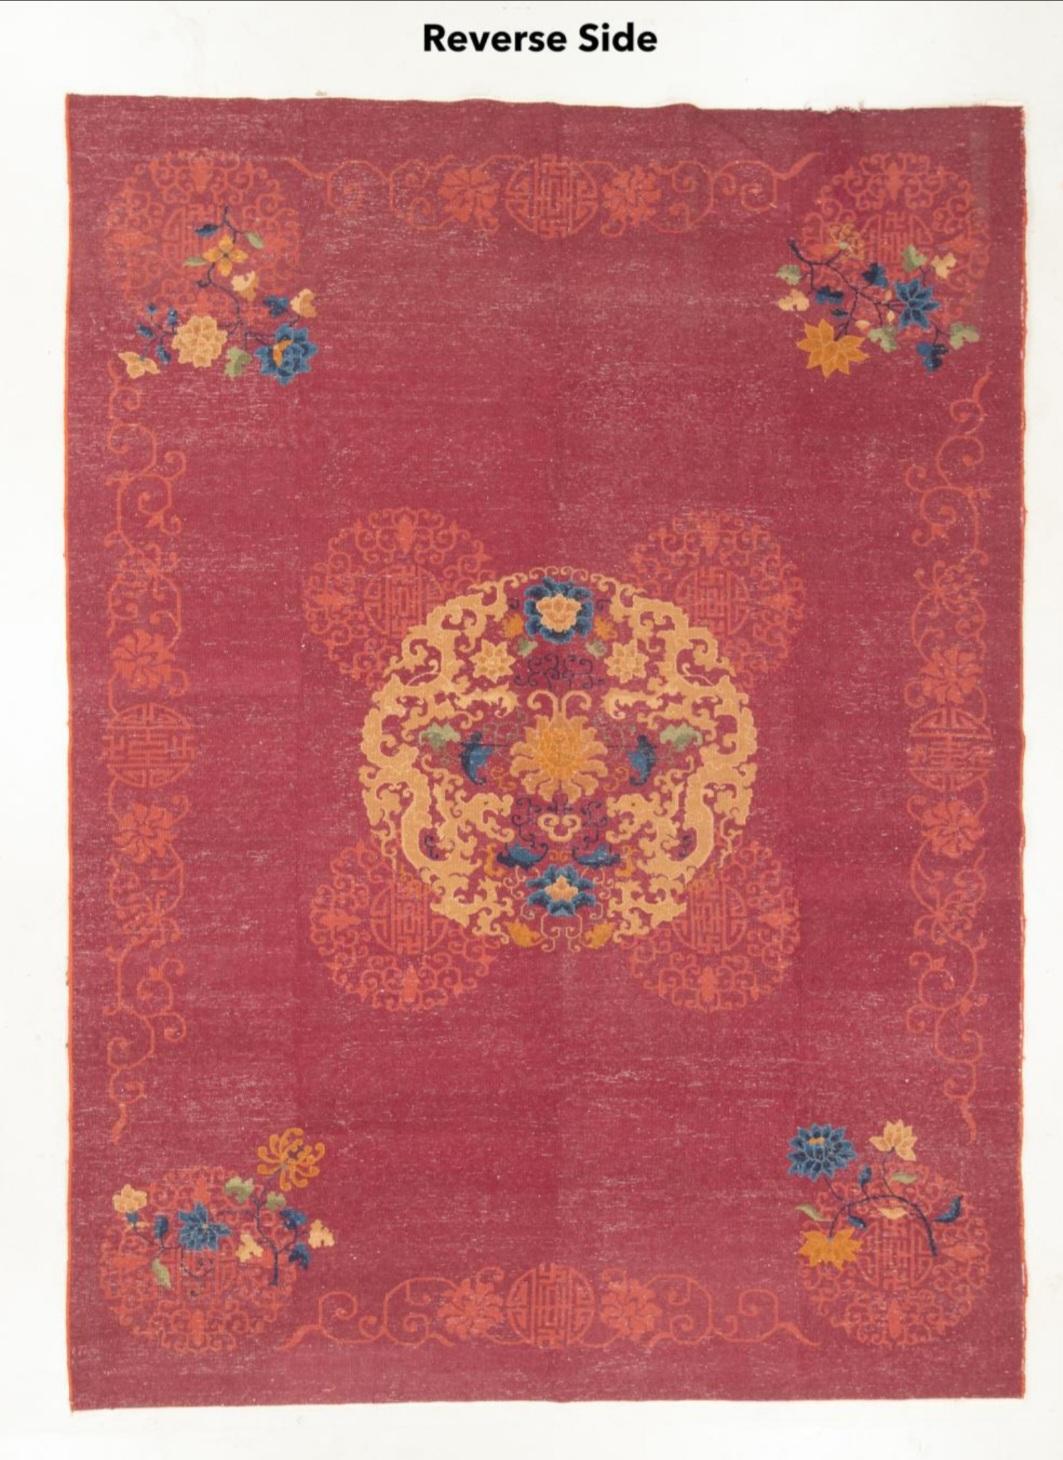 Antique Chinese Art Deco Rug circa 1920 8.6x11.6 In Good Condition For Sale In Los Angeles, CA